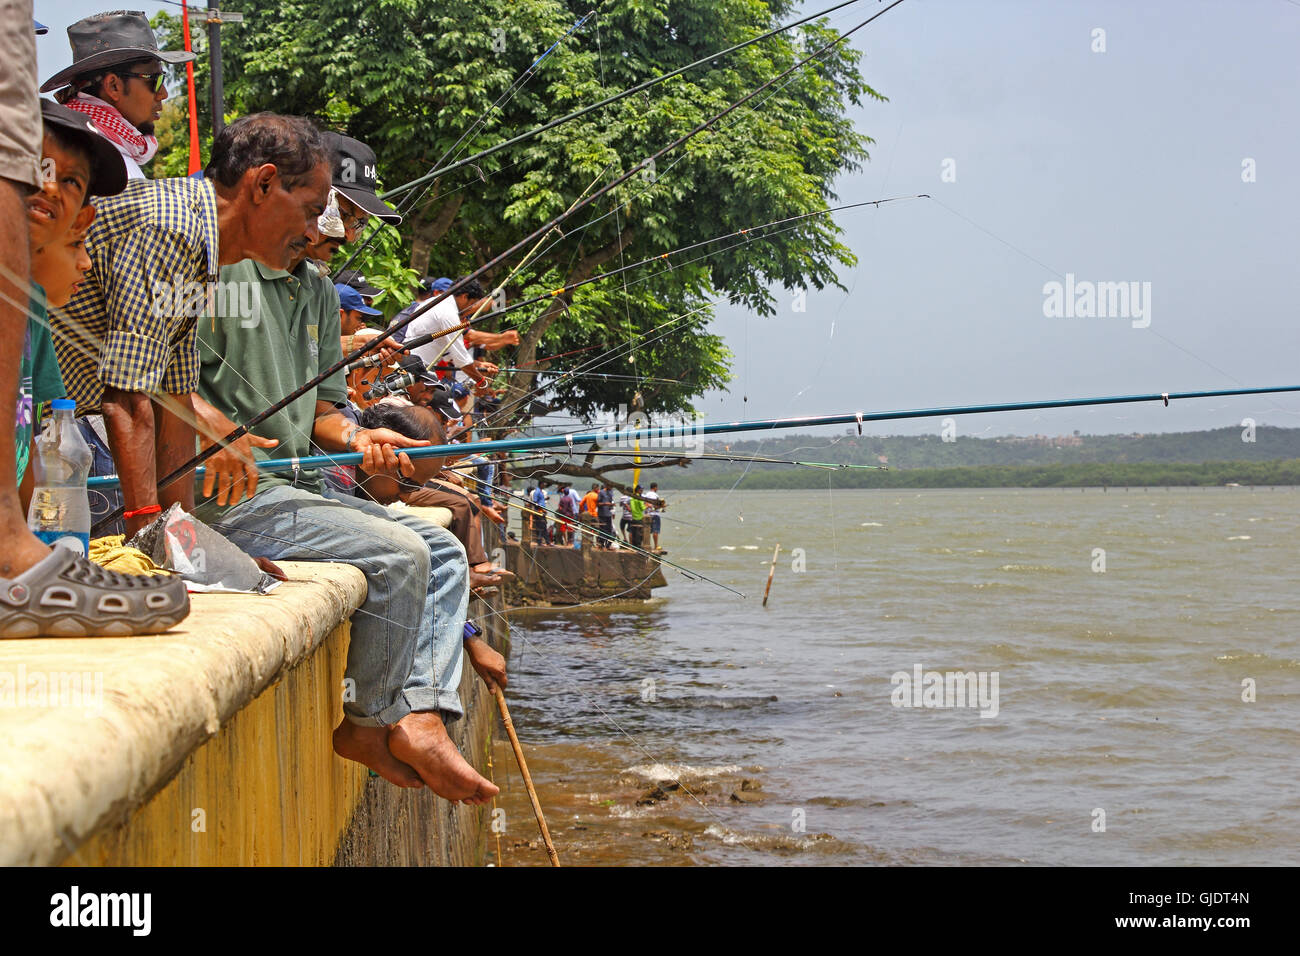 Goa, India. 15th Aug, 2016. Anglers participate in the 17th Annual All Goa Fishing Competition and Sea Food Festival at Ribandar in Goa, India. This is an annual event held on the banks of River Mondovi. MathewJoseK/Alamy Live News Stock Photo